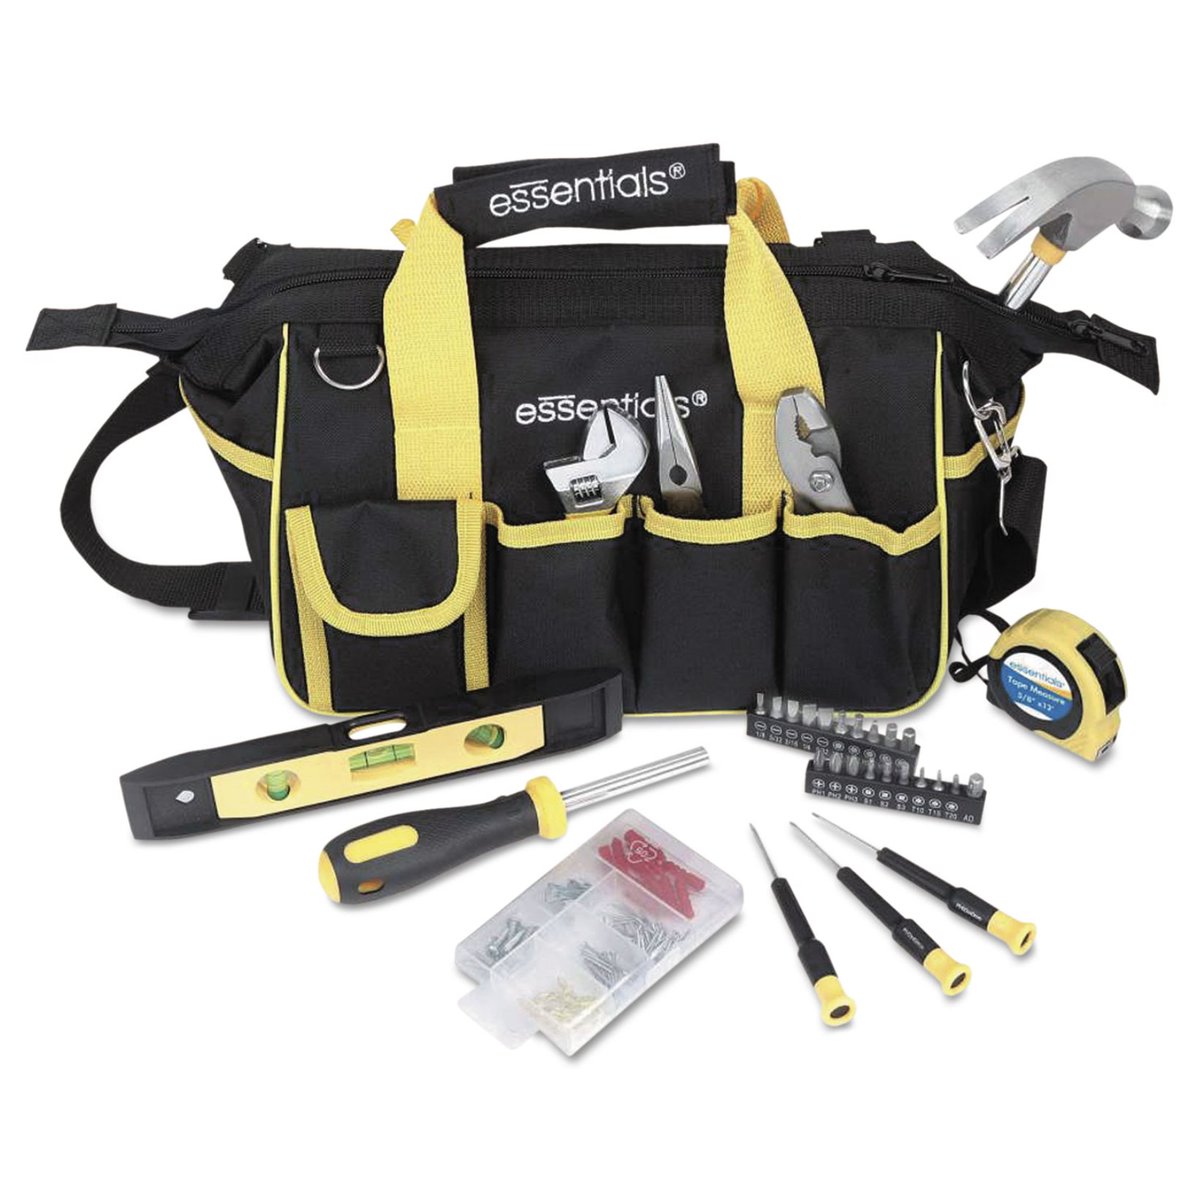 32-Piece Expanded Tool Kit with Bag

Every home and office needs one!

#PatrickandCo #PatrickandCompany #officesupplies #SanFrancisco #shoplocal #tools